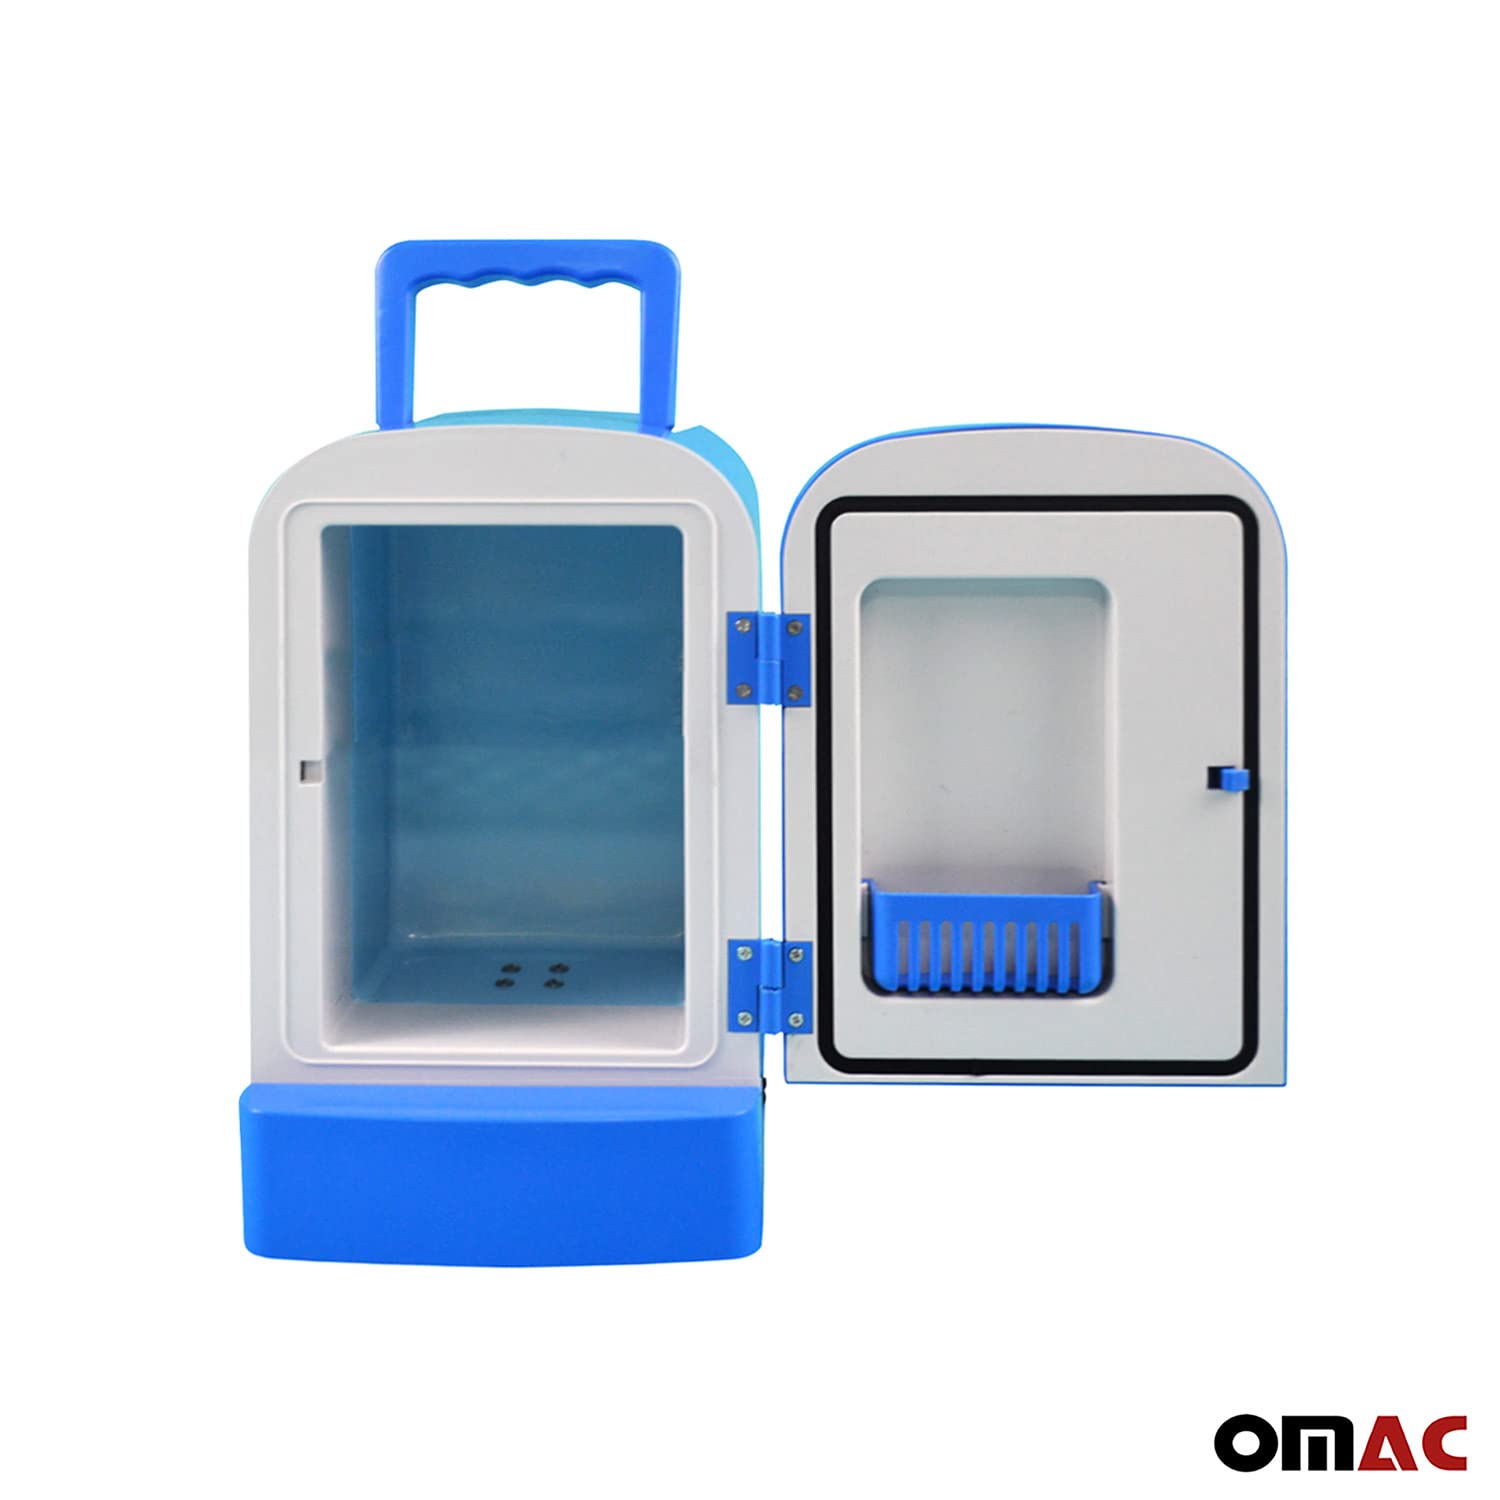 OMAC Mini Fridge 4 Liter AC/DC Power, 12V, Portable, Thermoelectric Cooler and Warmer Personal Refrigerators, Blue